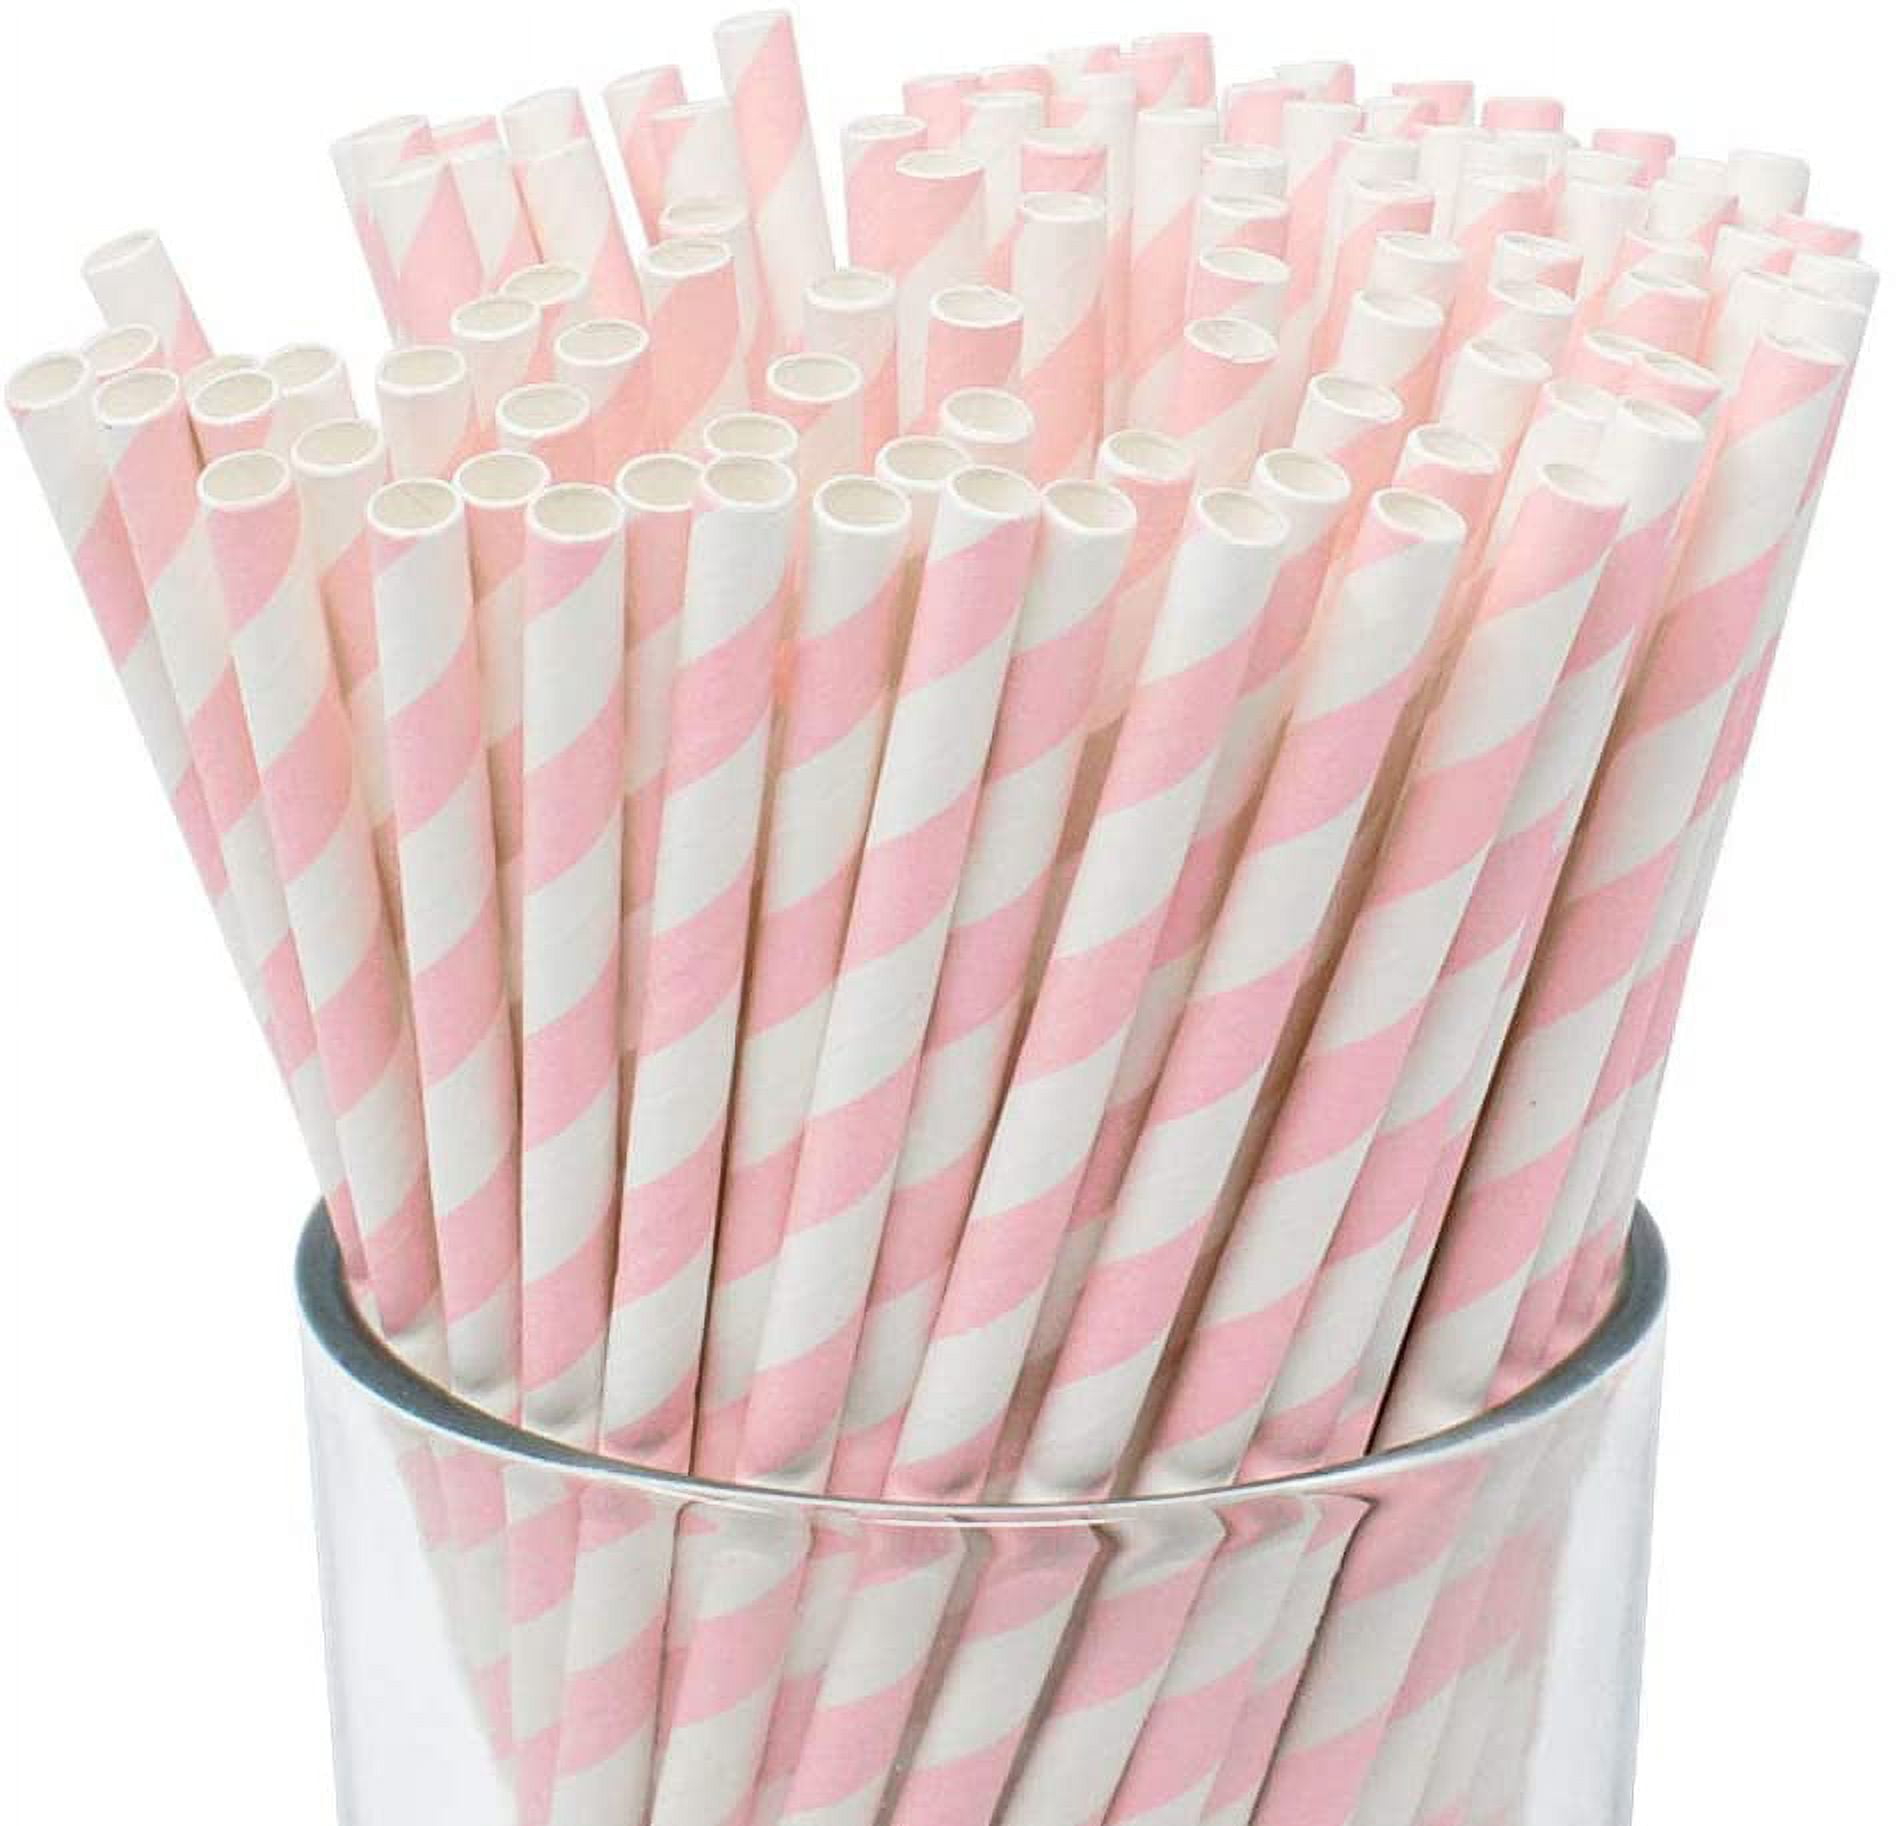 Clear Plastic Biodegradable Straws 200 Bulk Pack. Reduce Your